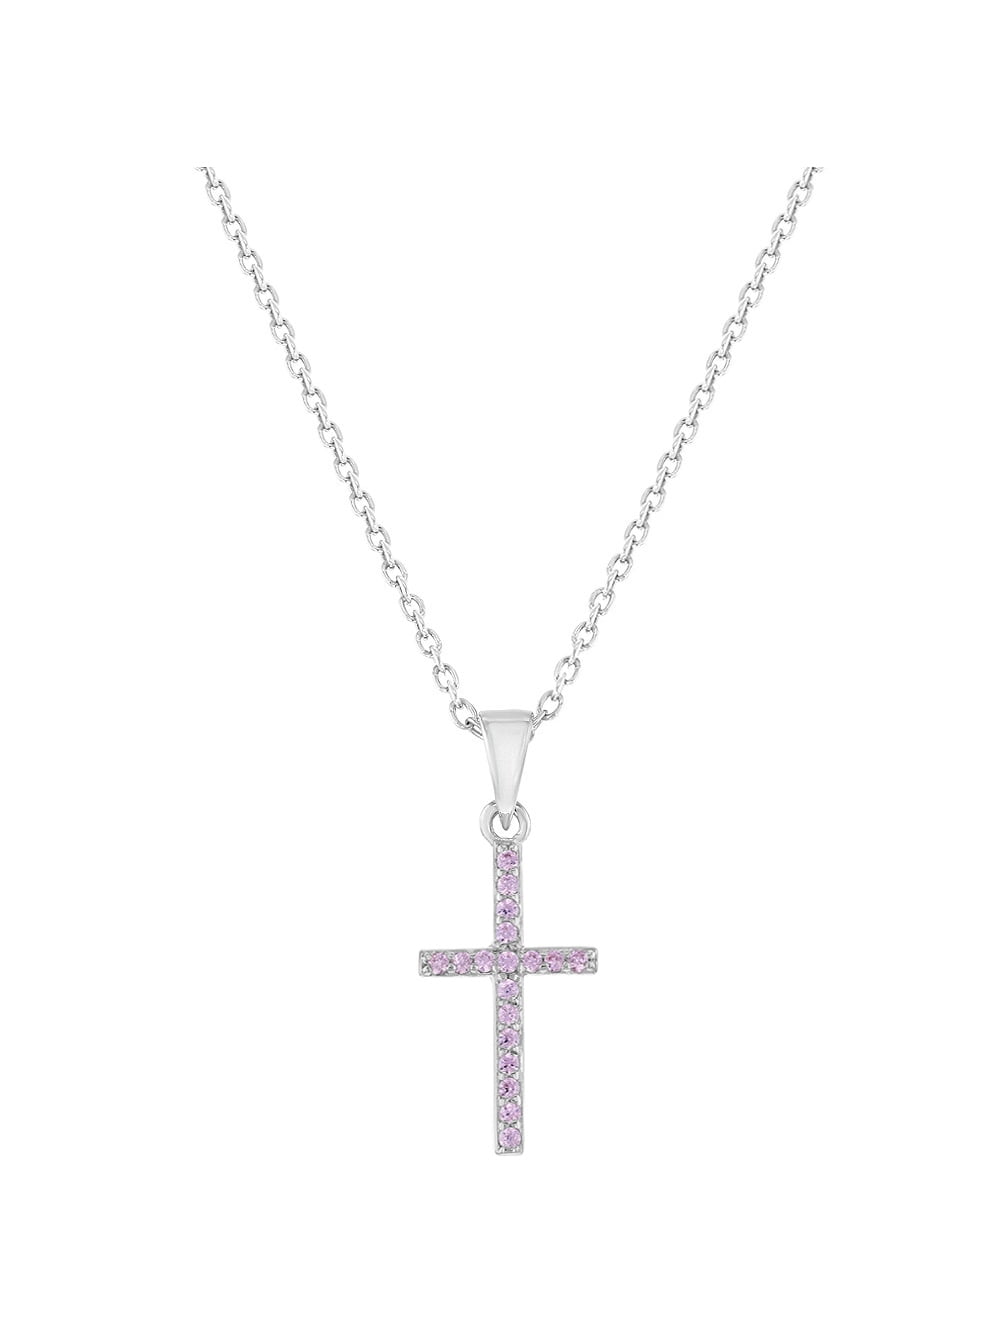 925 Sterling Silver Love Of The Crown Cross Pendant